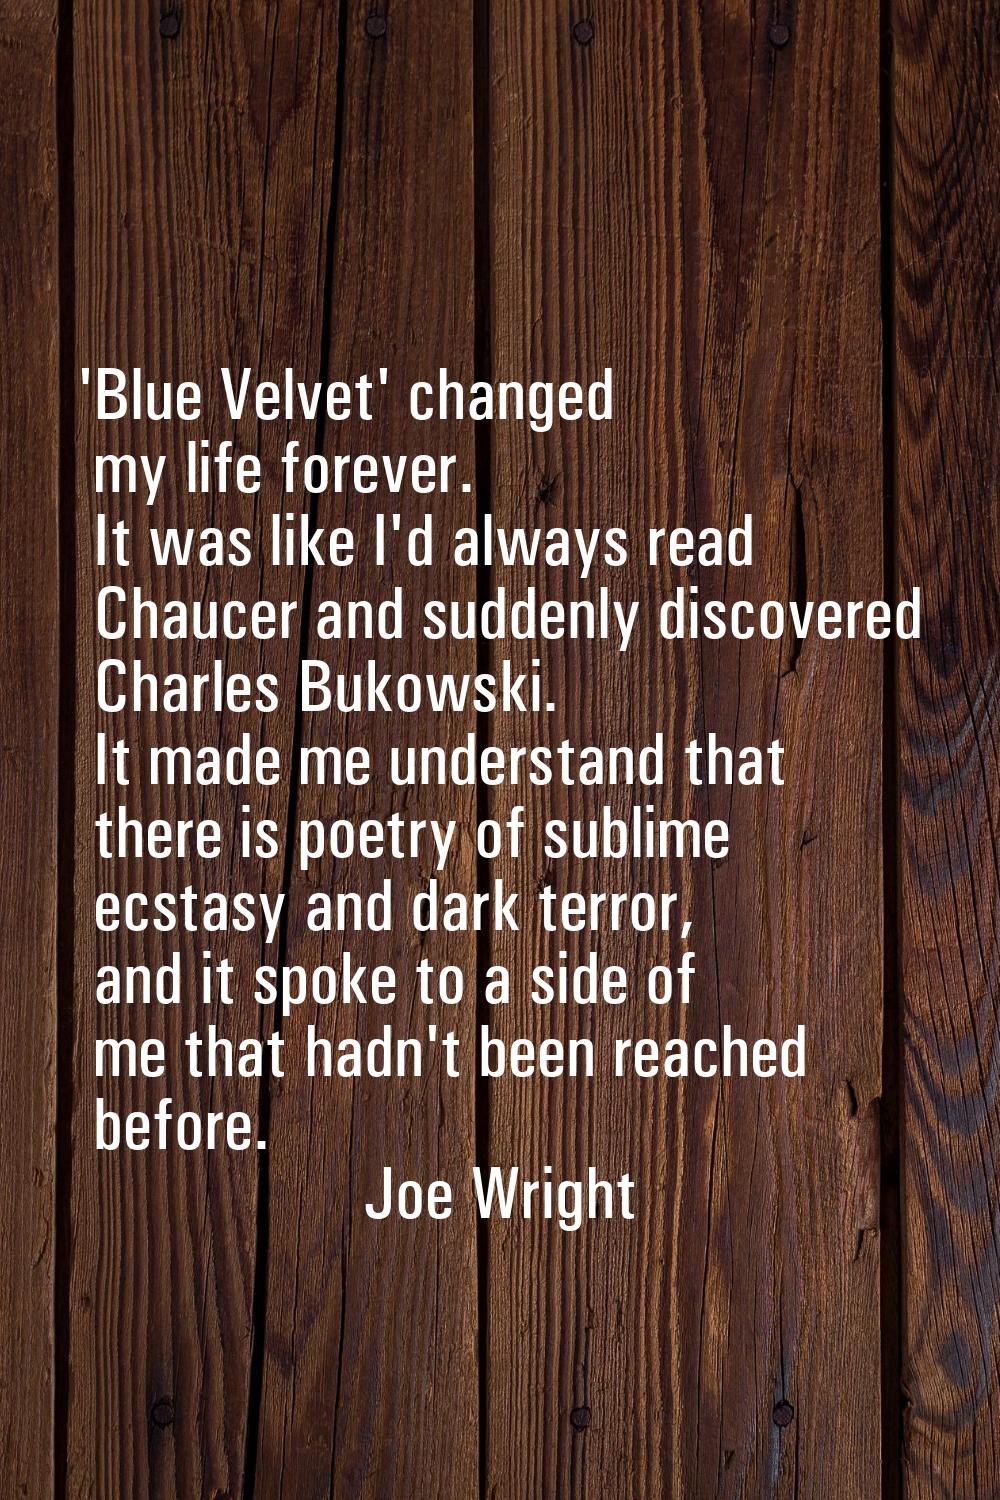 'Blue Velvet' changed my life forever. It was like I'd always read Chaucer and suddenly discovered 